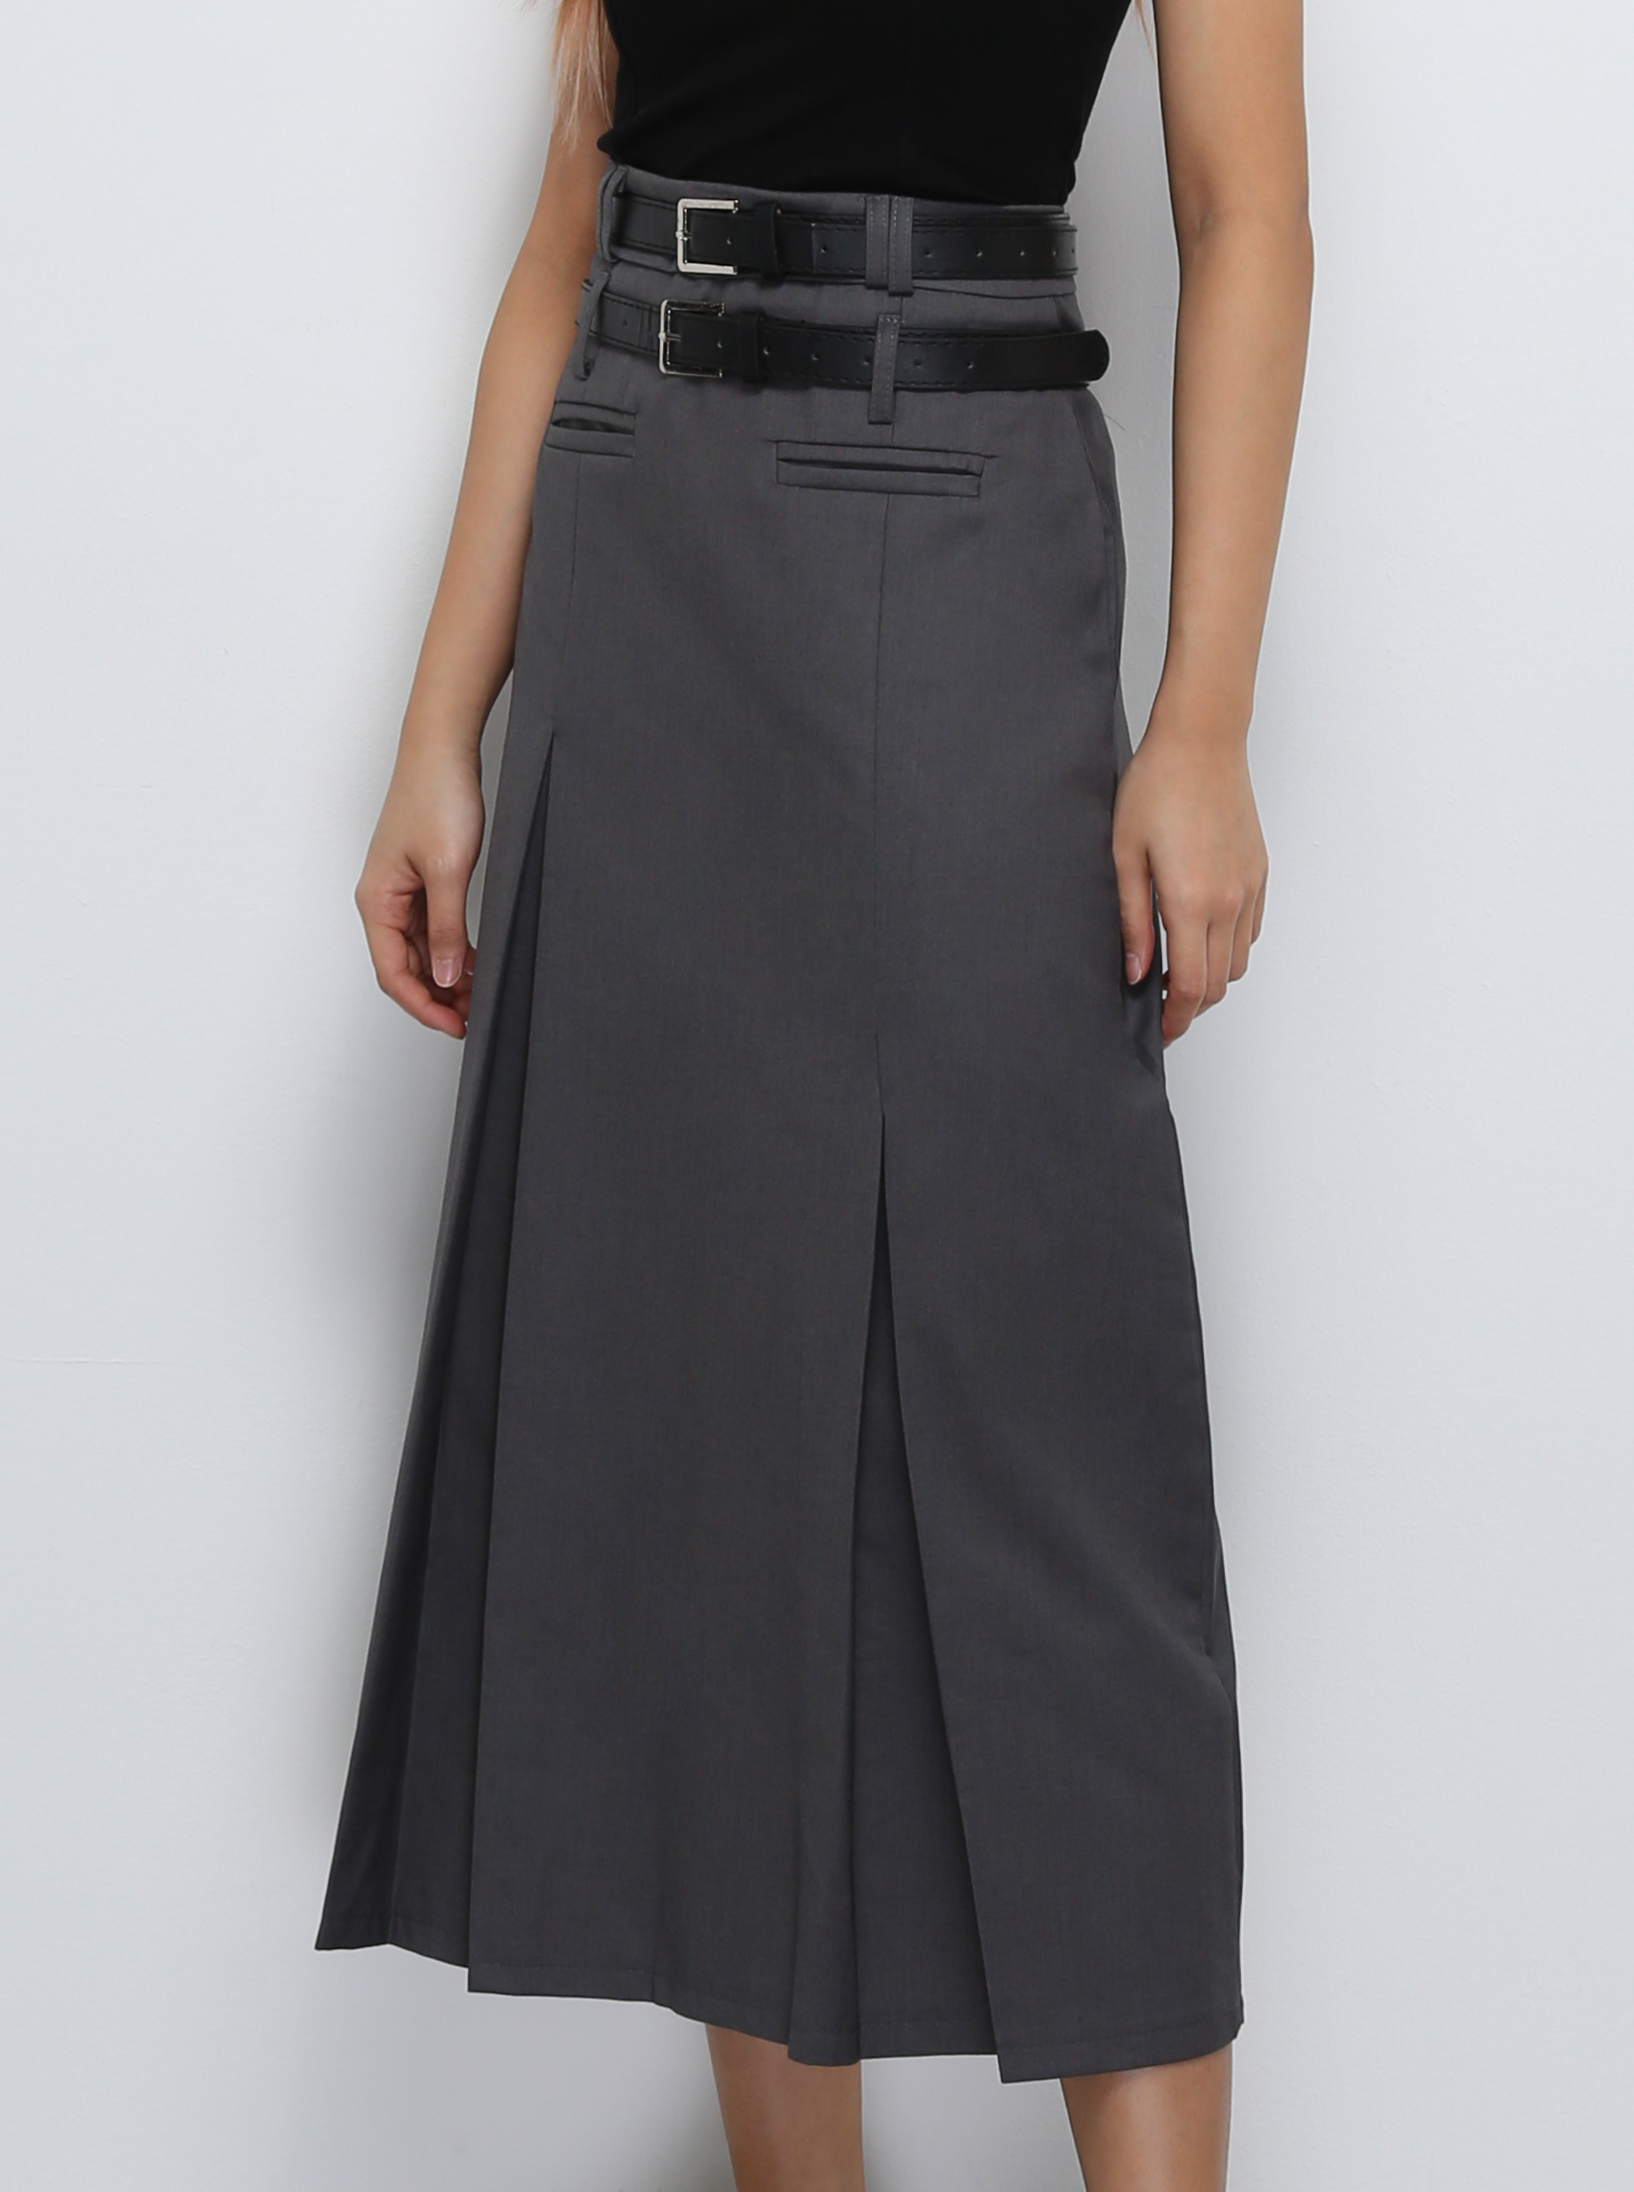 High Waist Pleated With Two Belt Long Skirt 29152